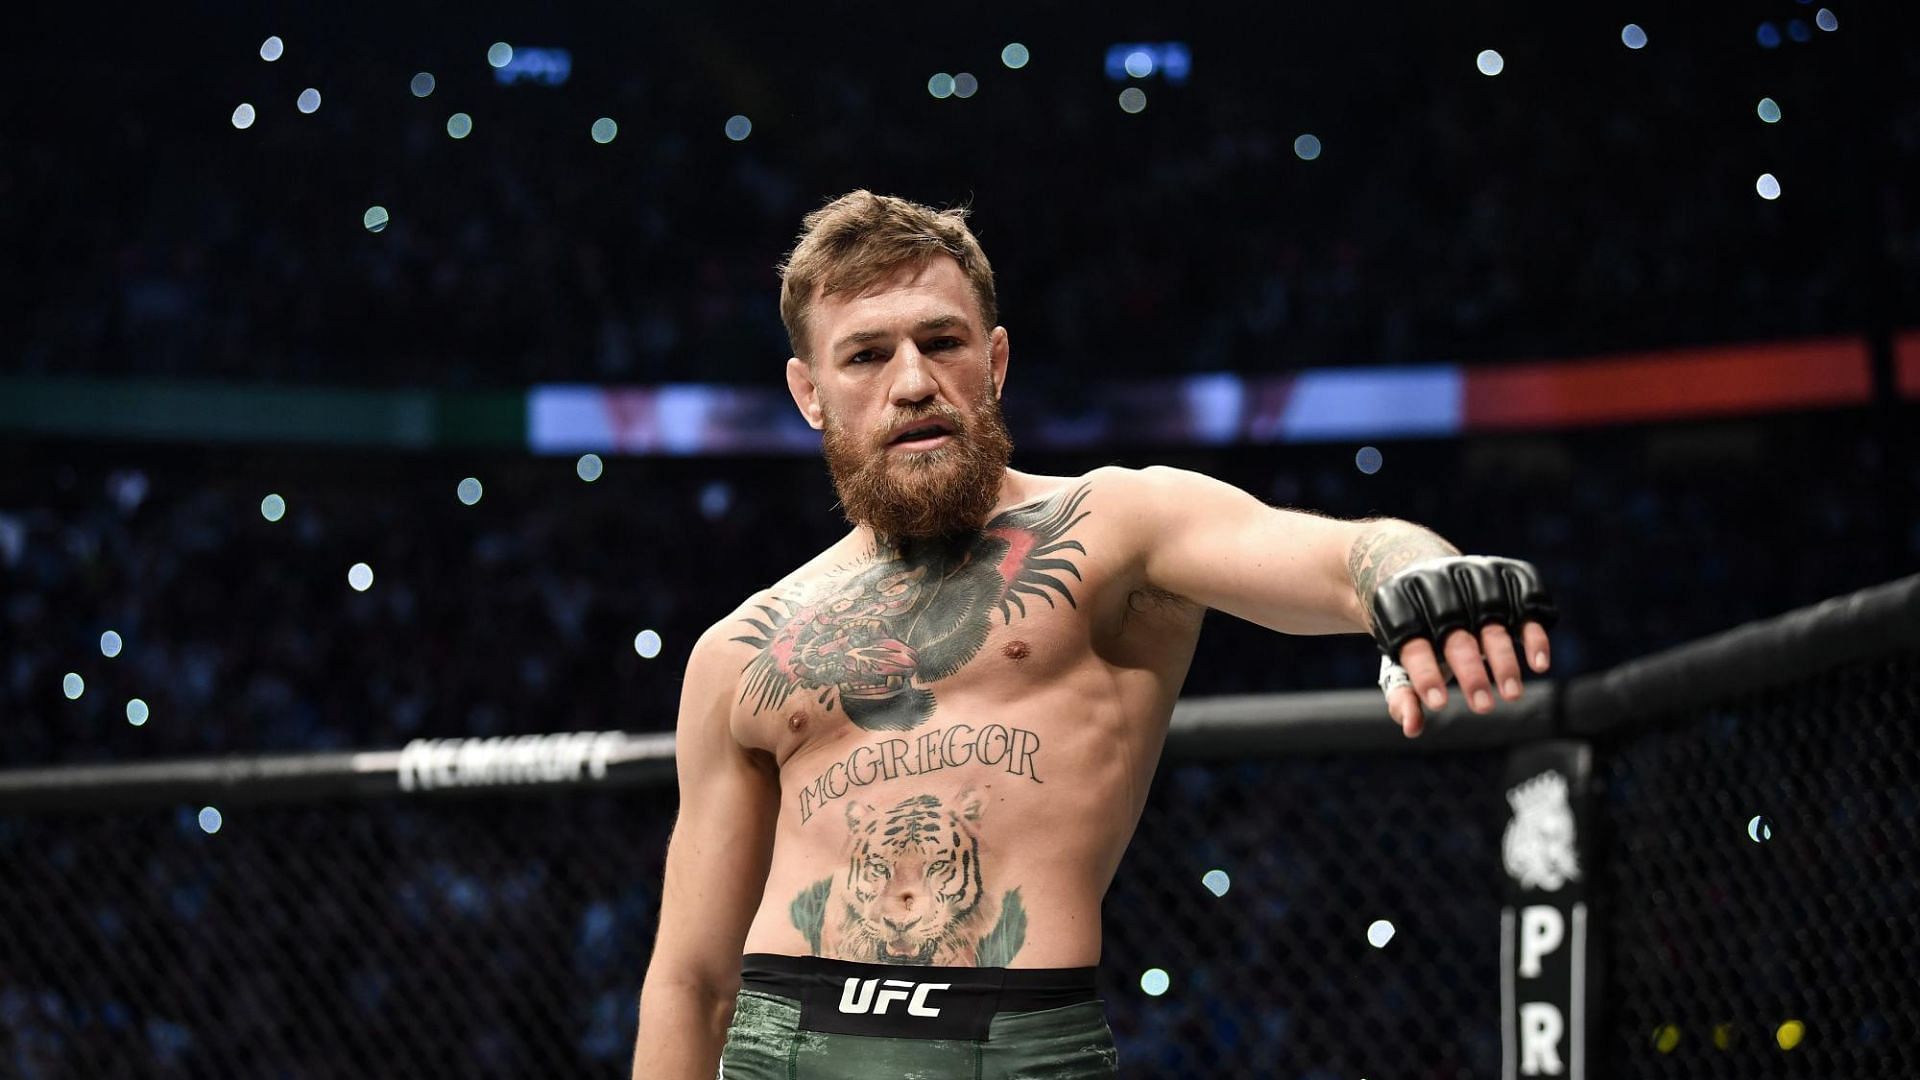 Conor McGregor may enter a WWE ring one day.